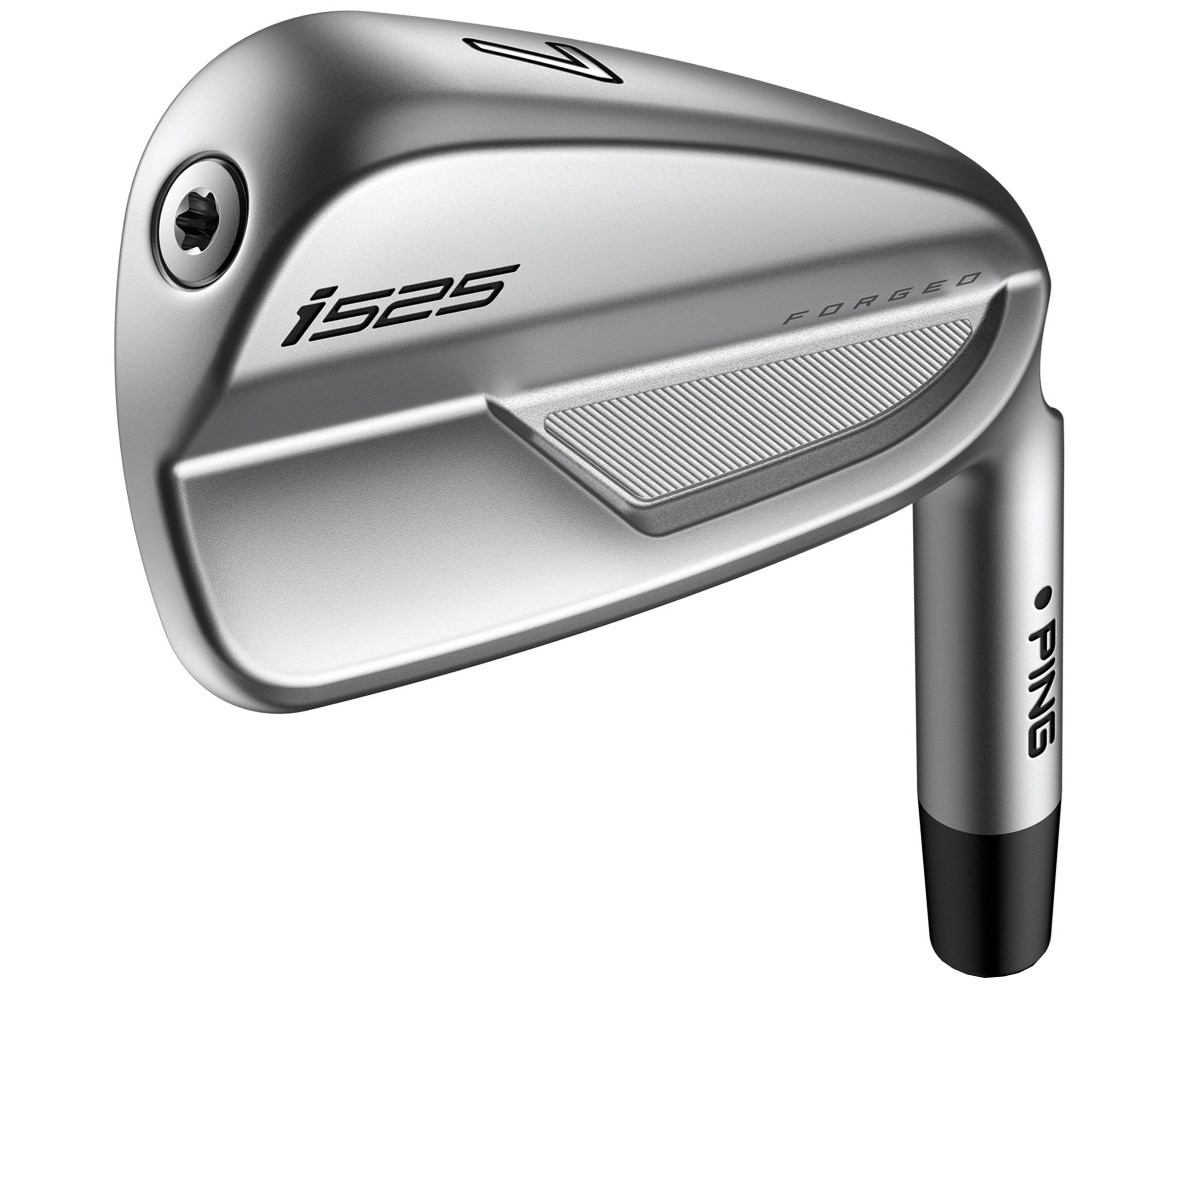 PING i500 5番アイアン DG tour issue s200